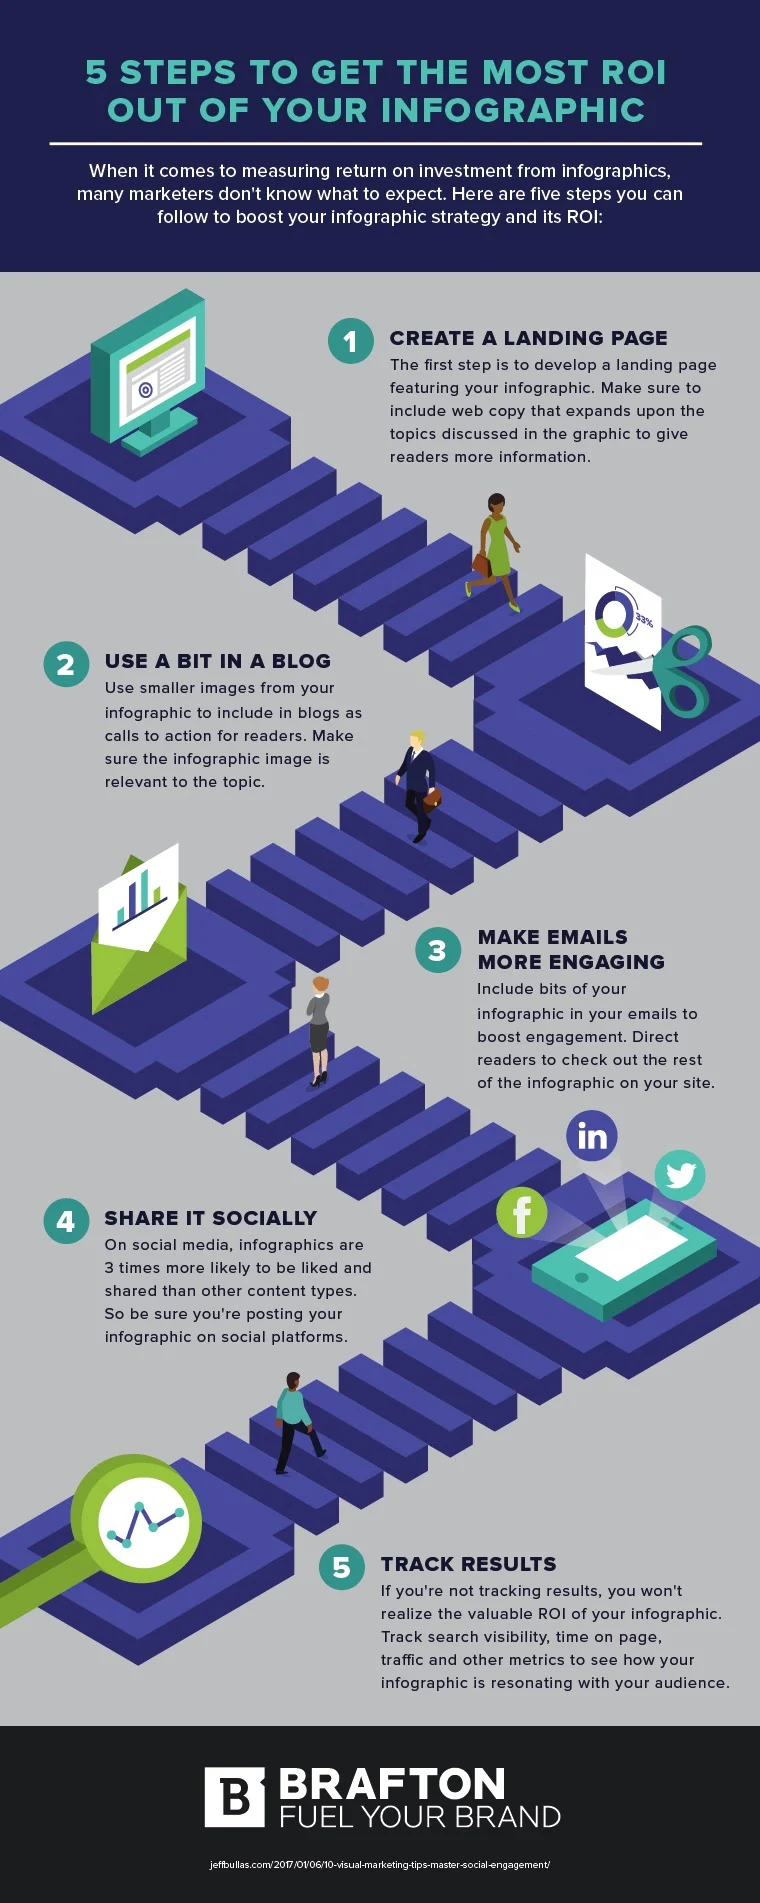 5 Steps to Get the Most Roi out of Your Infographic #Infographic